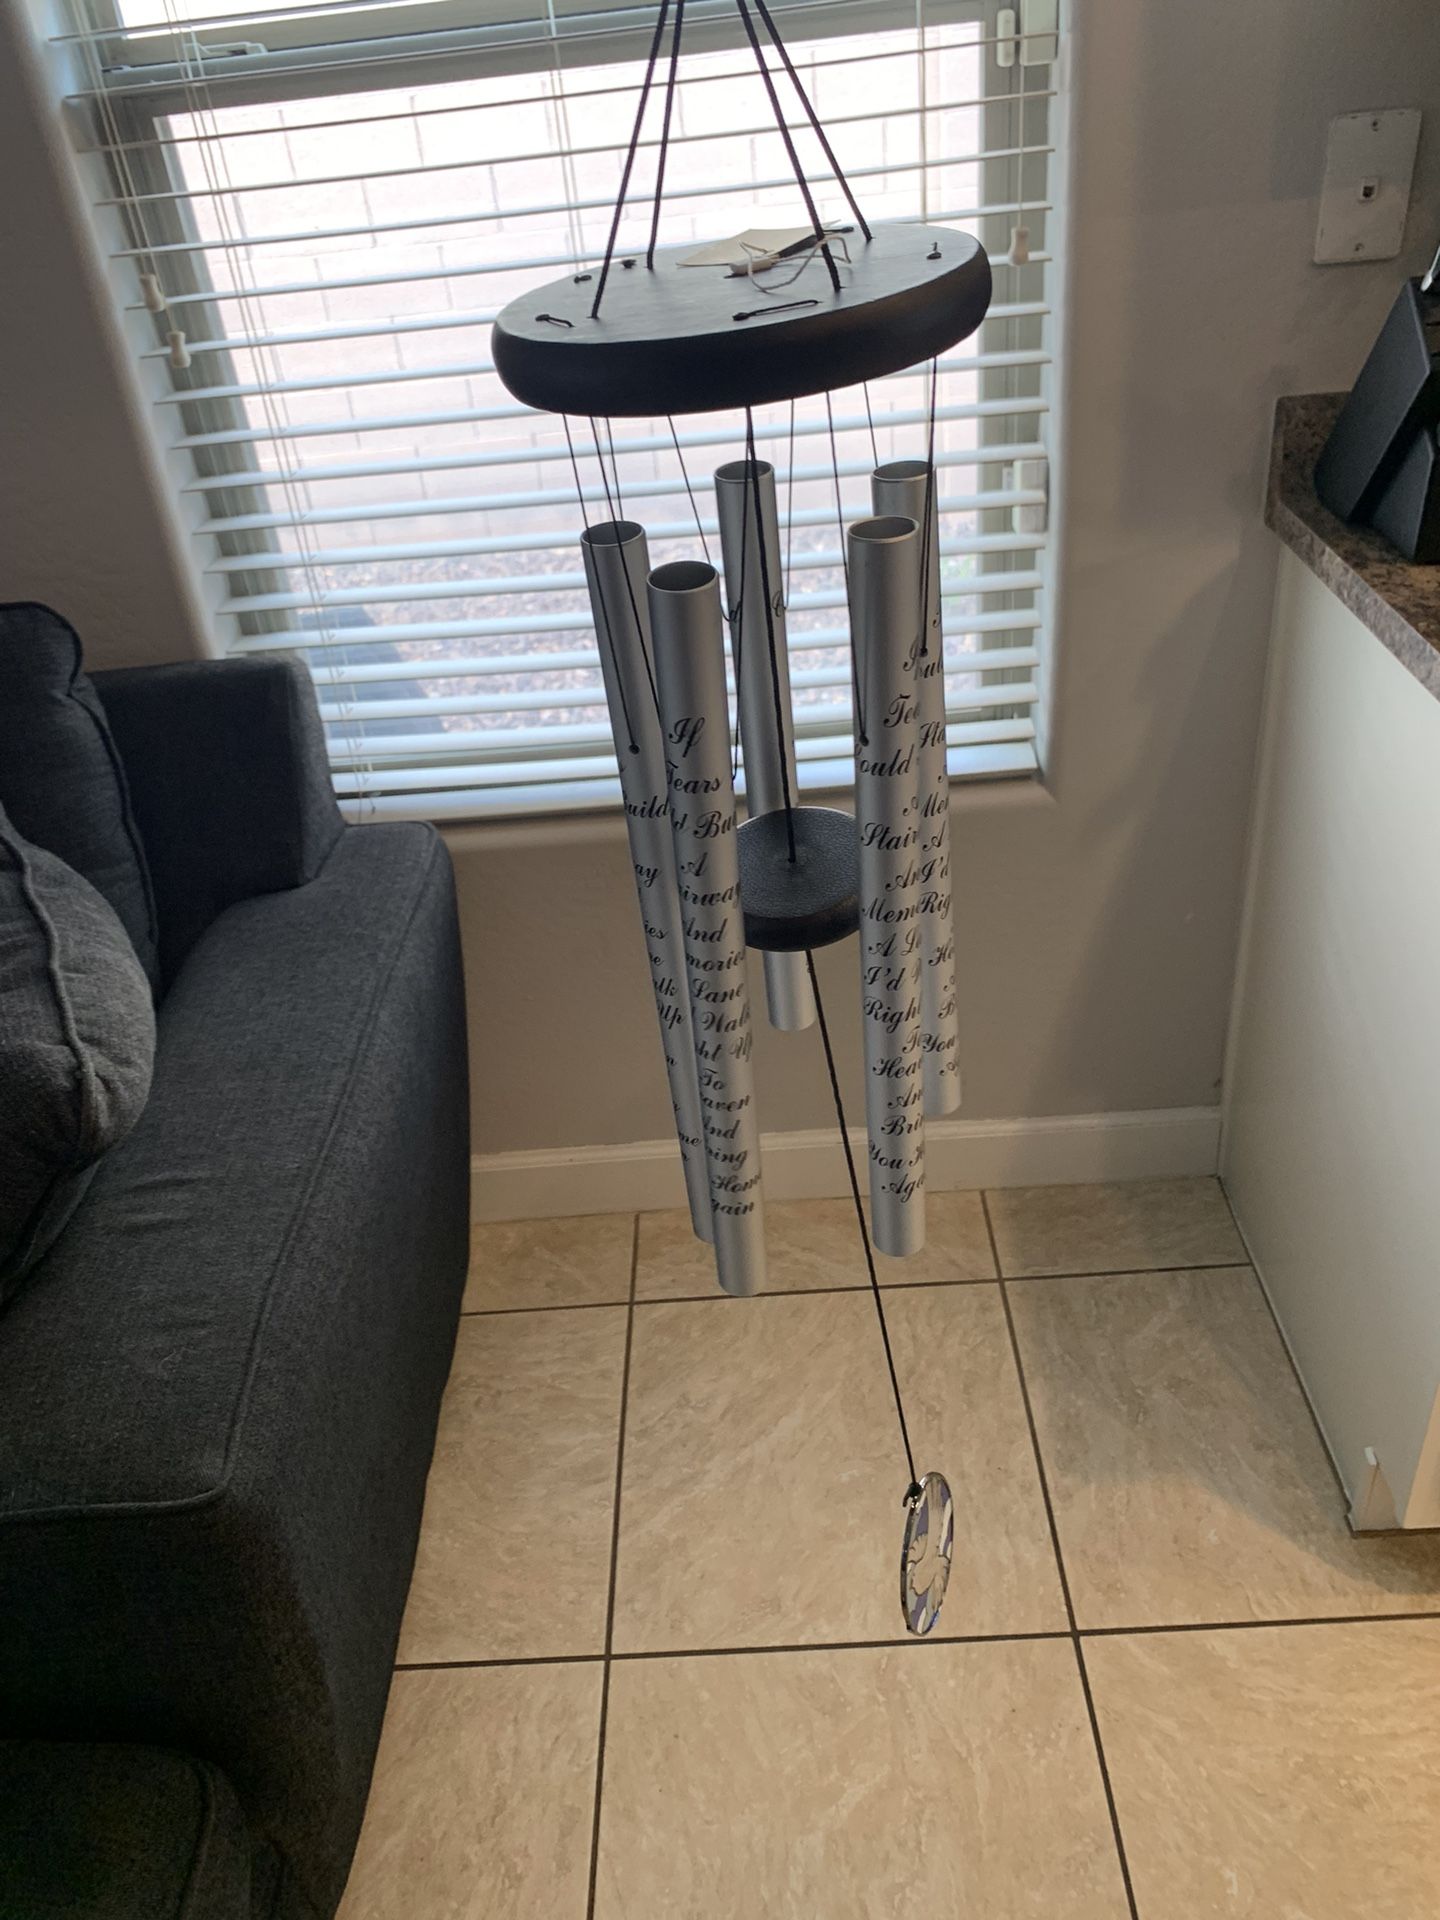 Wind Chimes Loss Of Loved One